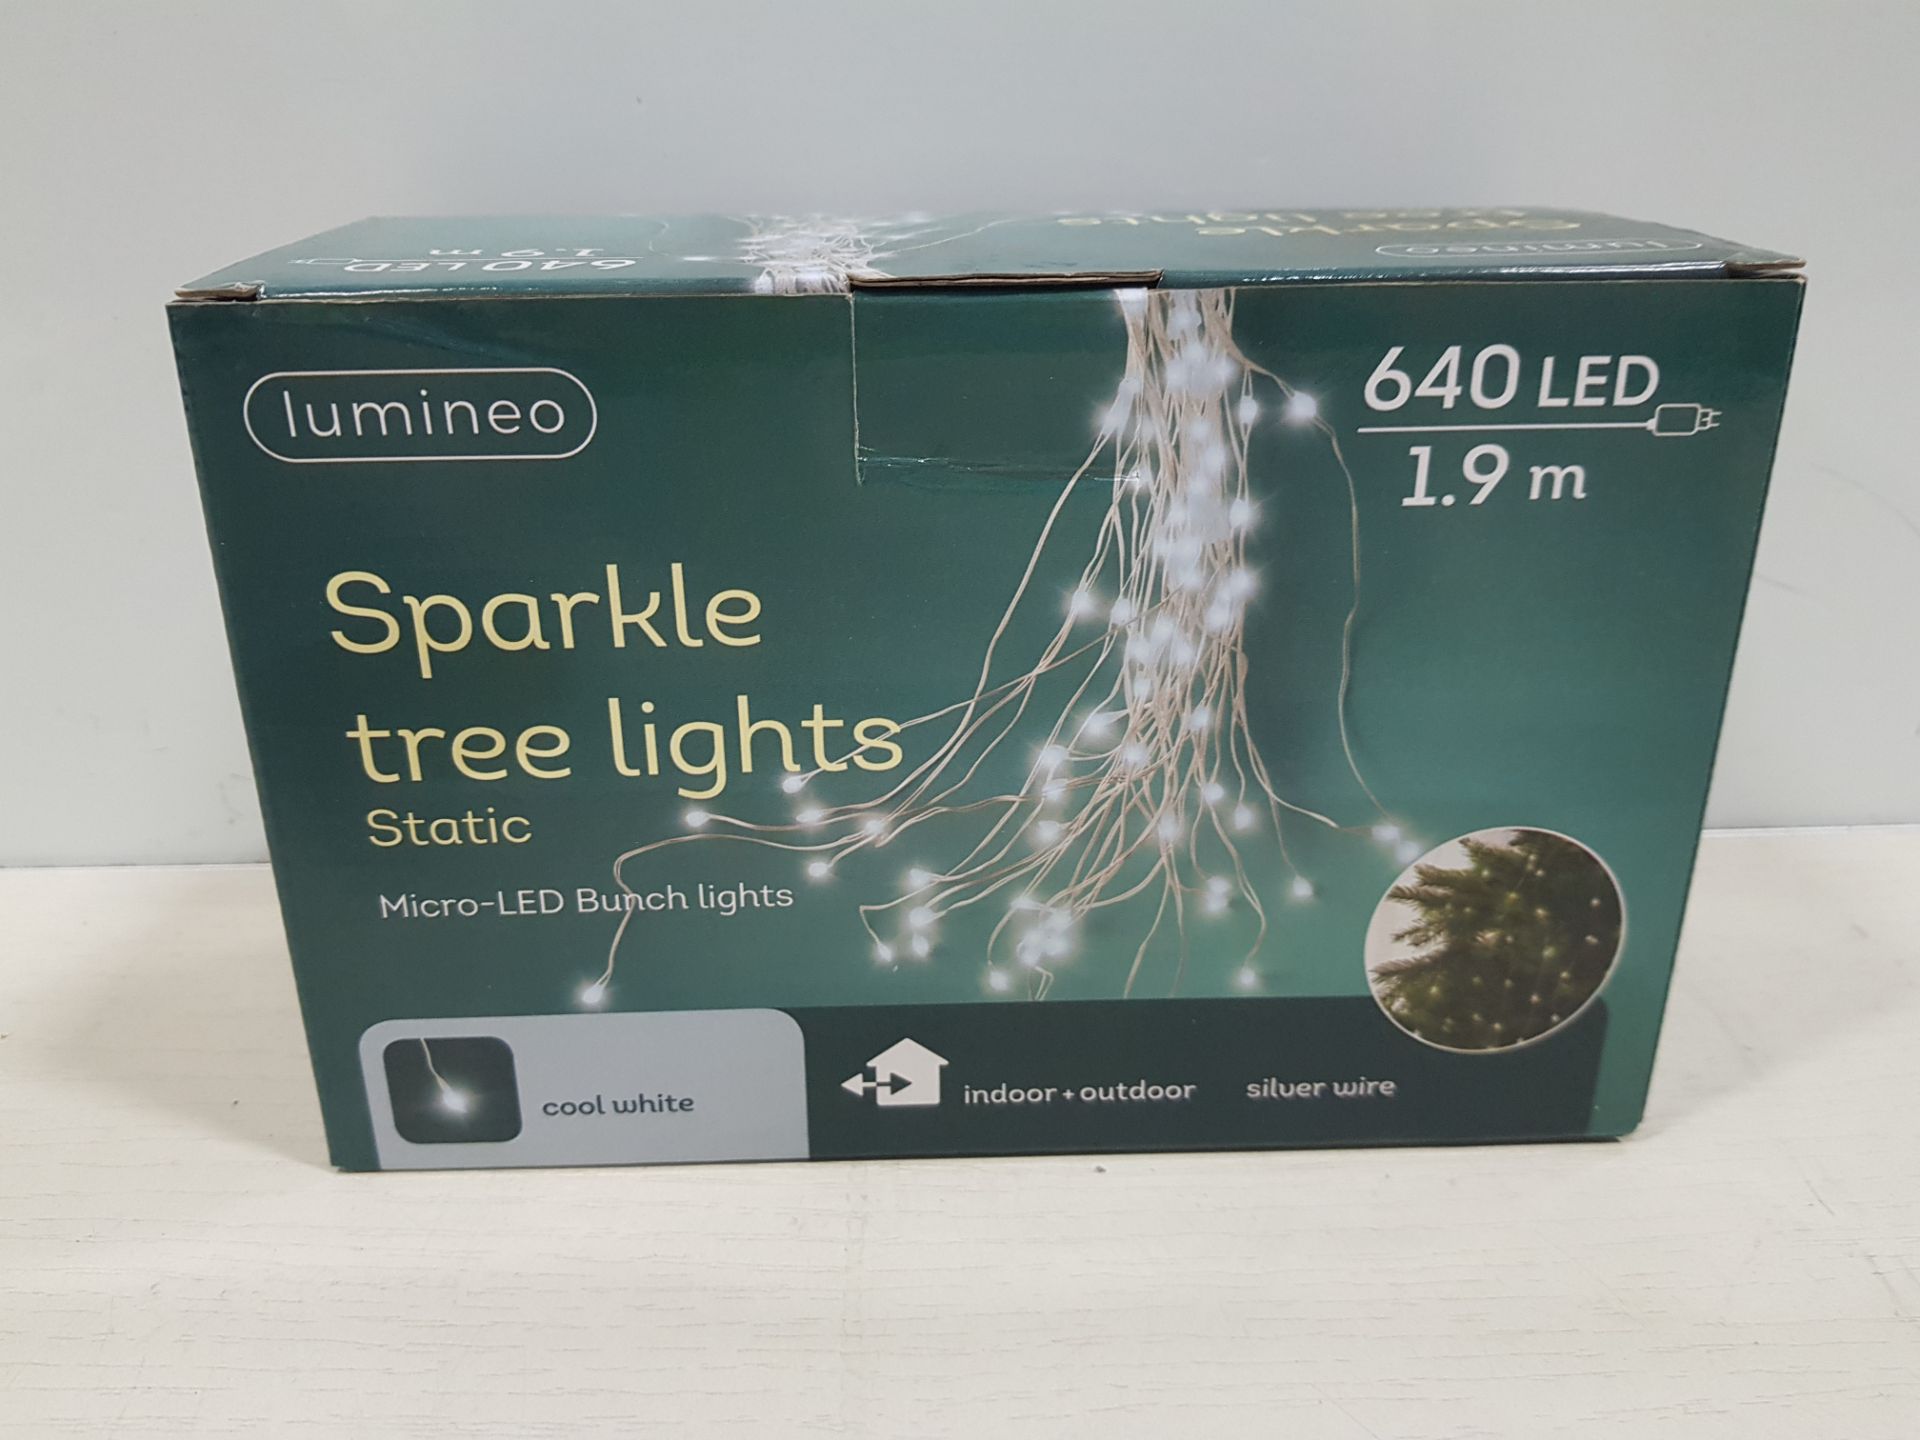 21 X LUMINEO 640 LED SPARKLE TREE LIGHTS - STATIC - MICRO-LED BUNCH LIGHTS - IN COOL WHITE